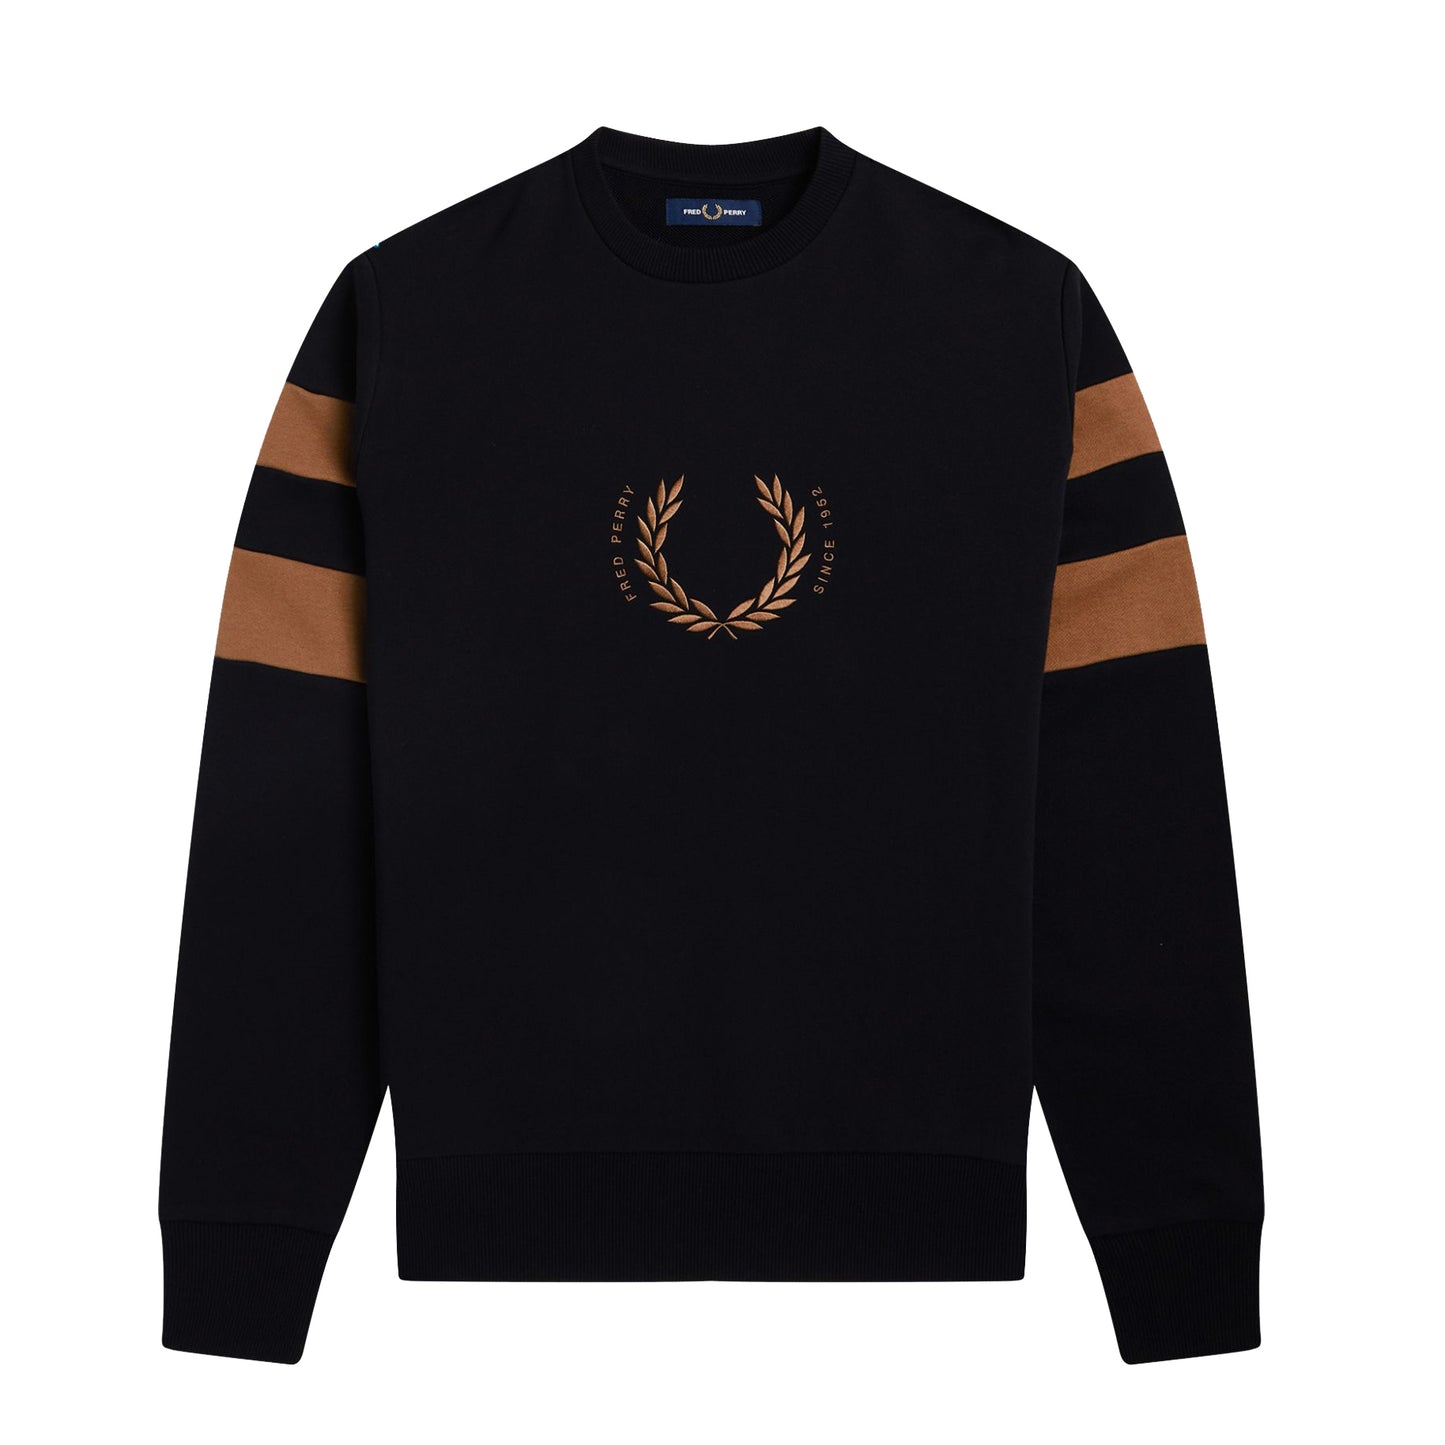 Fred Perry Bold Tipped Sweatshirt - Black